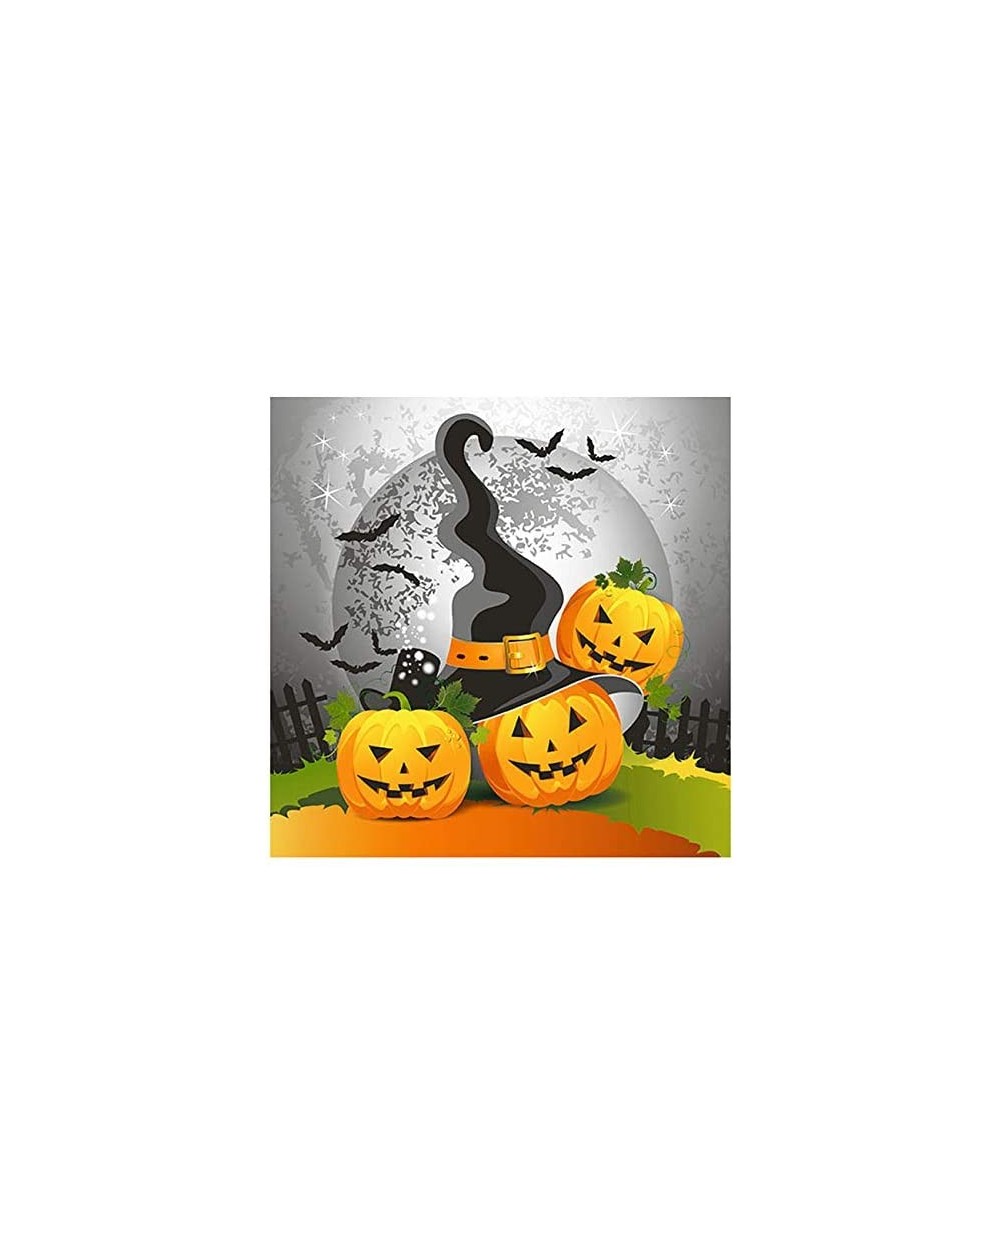 Tableware Halloween Lunch Size Napkins Full Moon Fright - 20 Count - Full Moon Fright - C818XEMHN60 $9.74